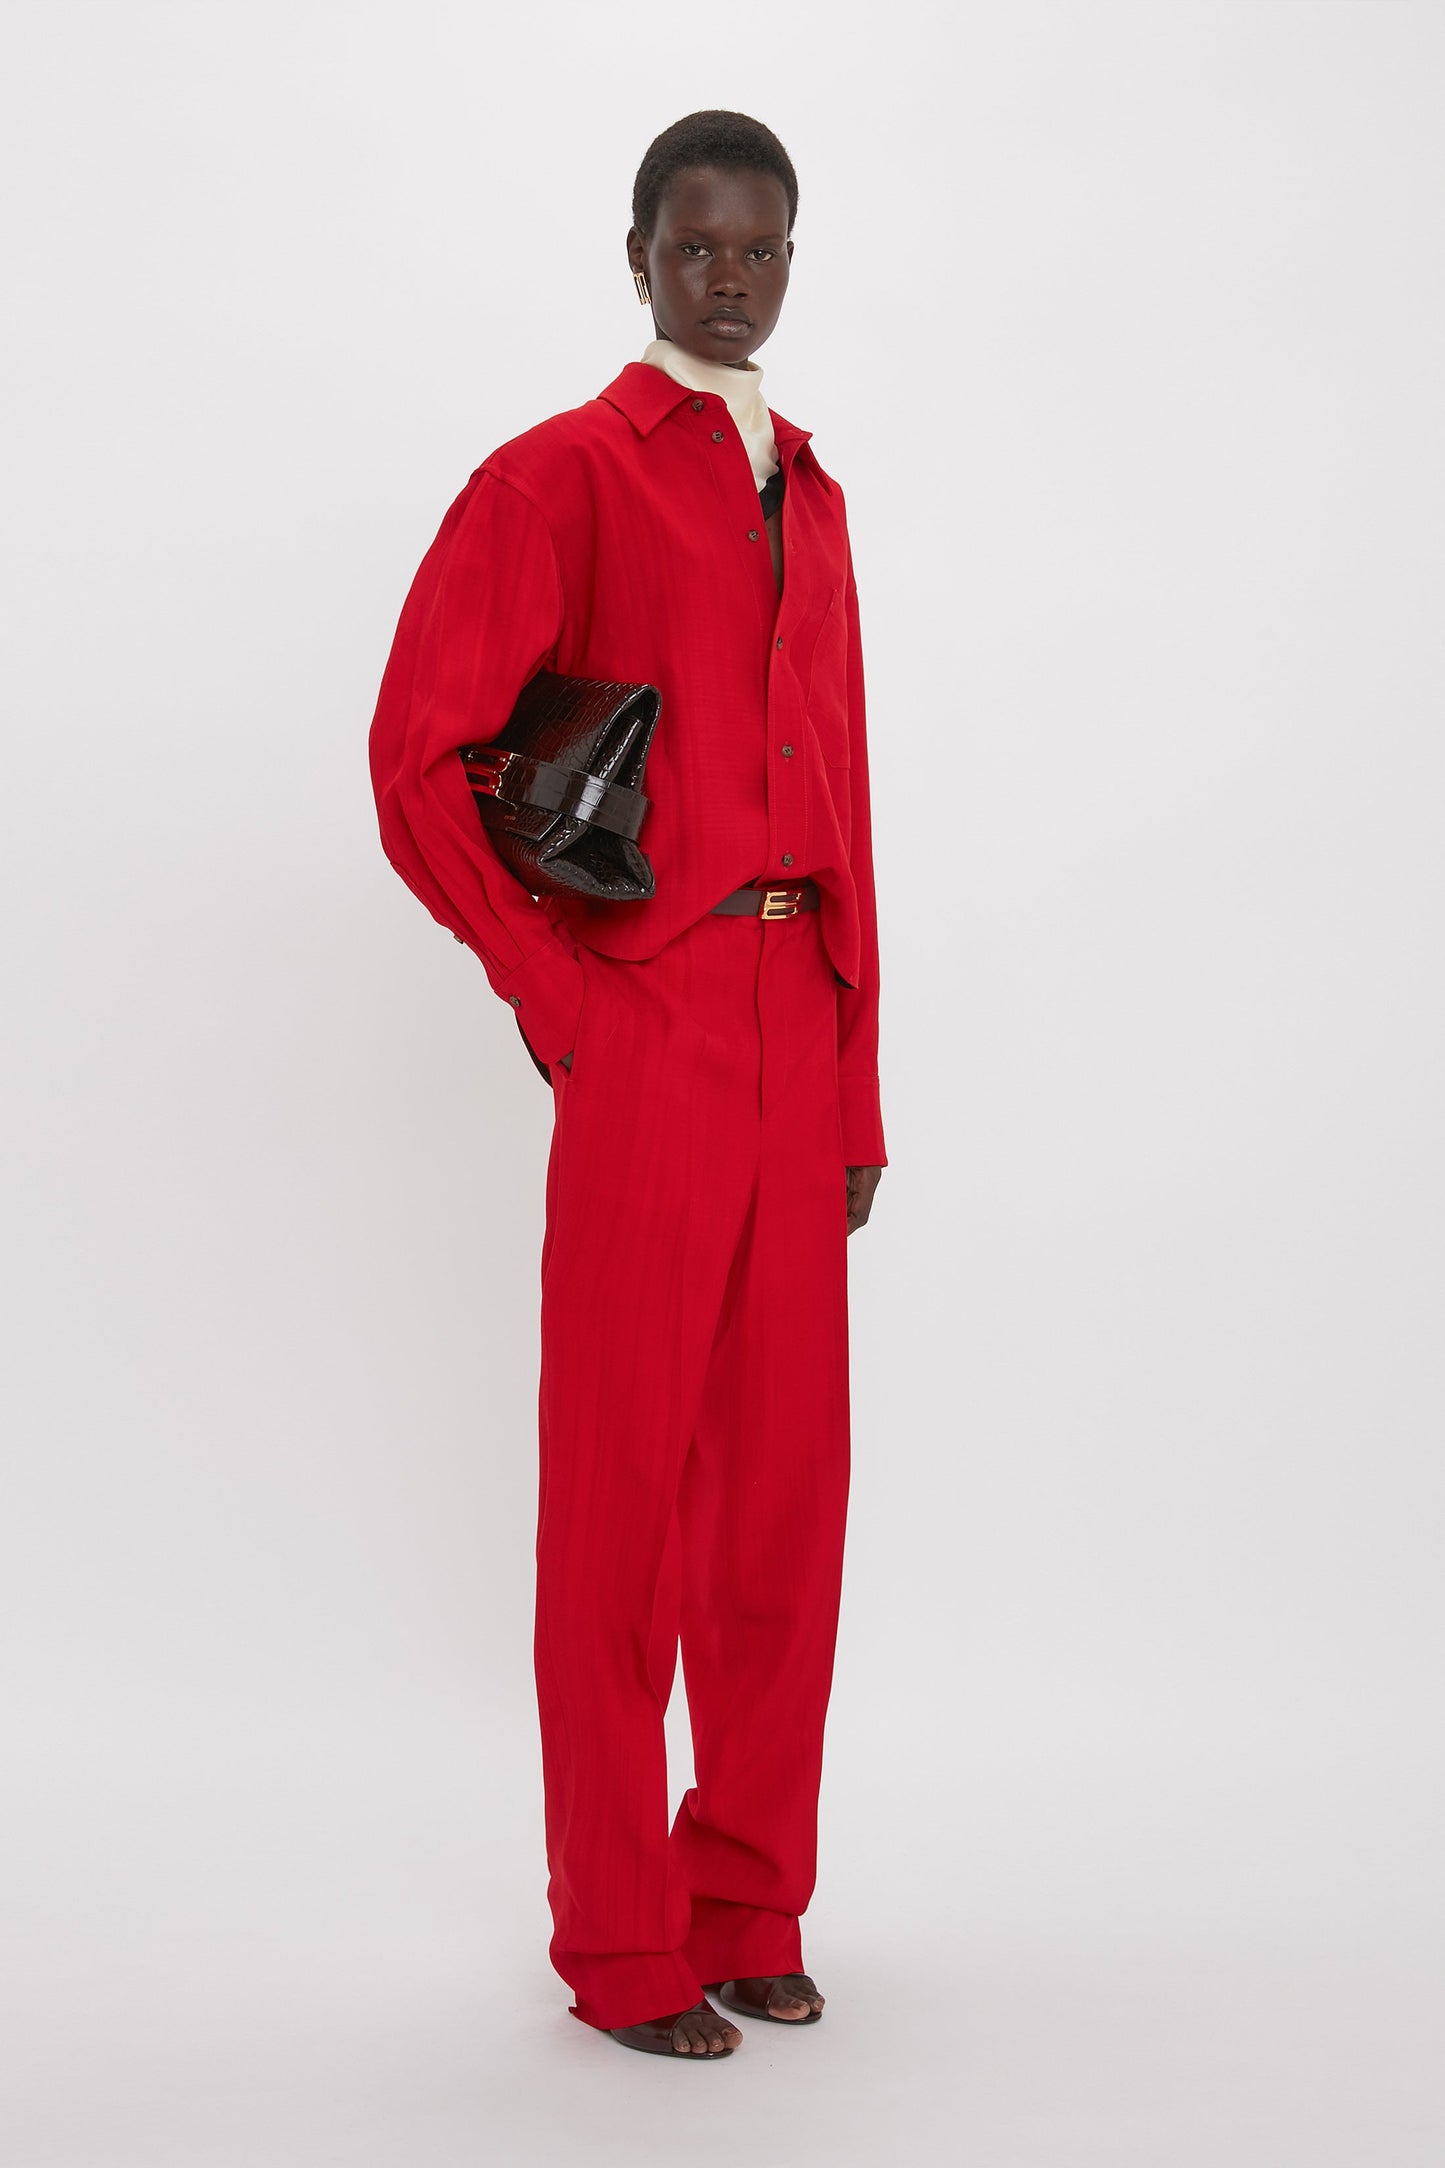 Person standing in a white space, wearing a red pantsuit with traditional tailoring and Tapered Leg Trouser In Carmine by Victoria Beckham, holding a black handbag.